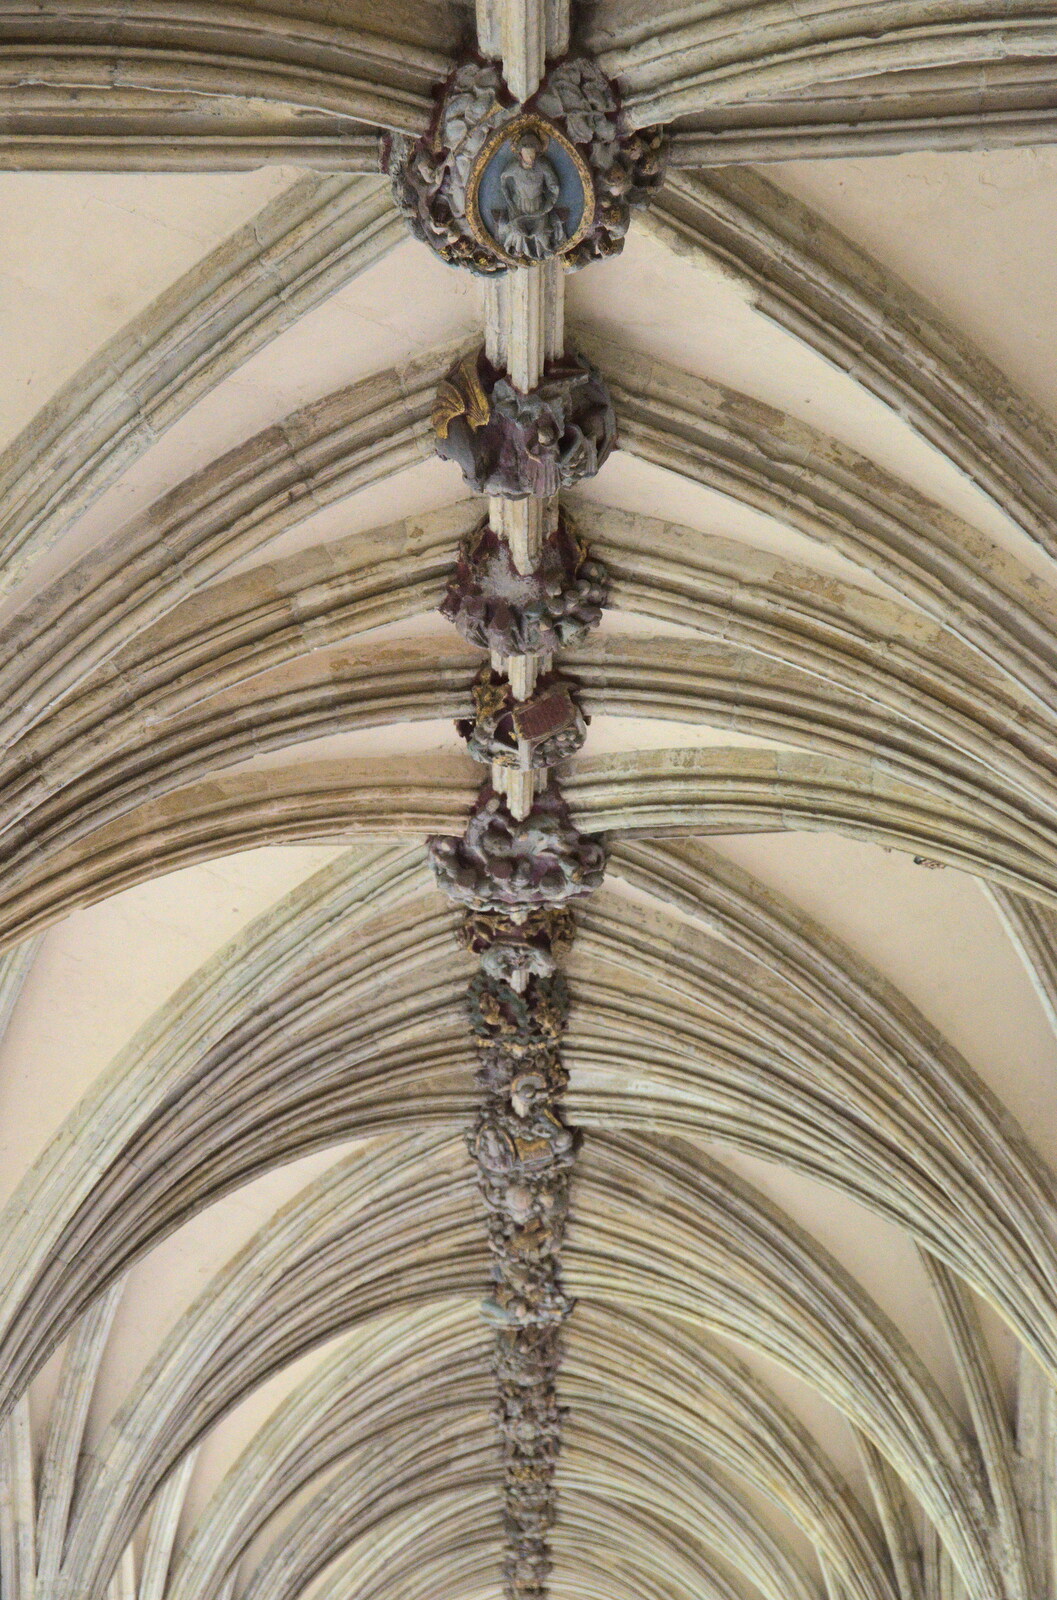 A line of roof bosses from Discovering the Hidden City: Norwich, Norfolk - 23rd May 2022